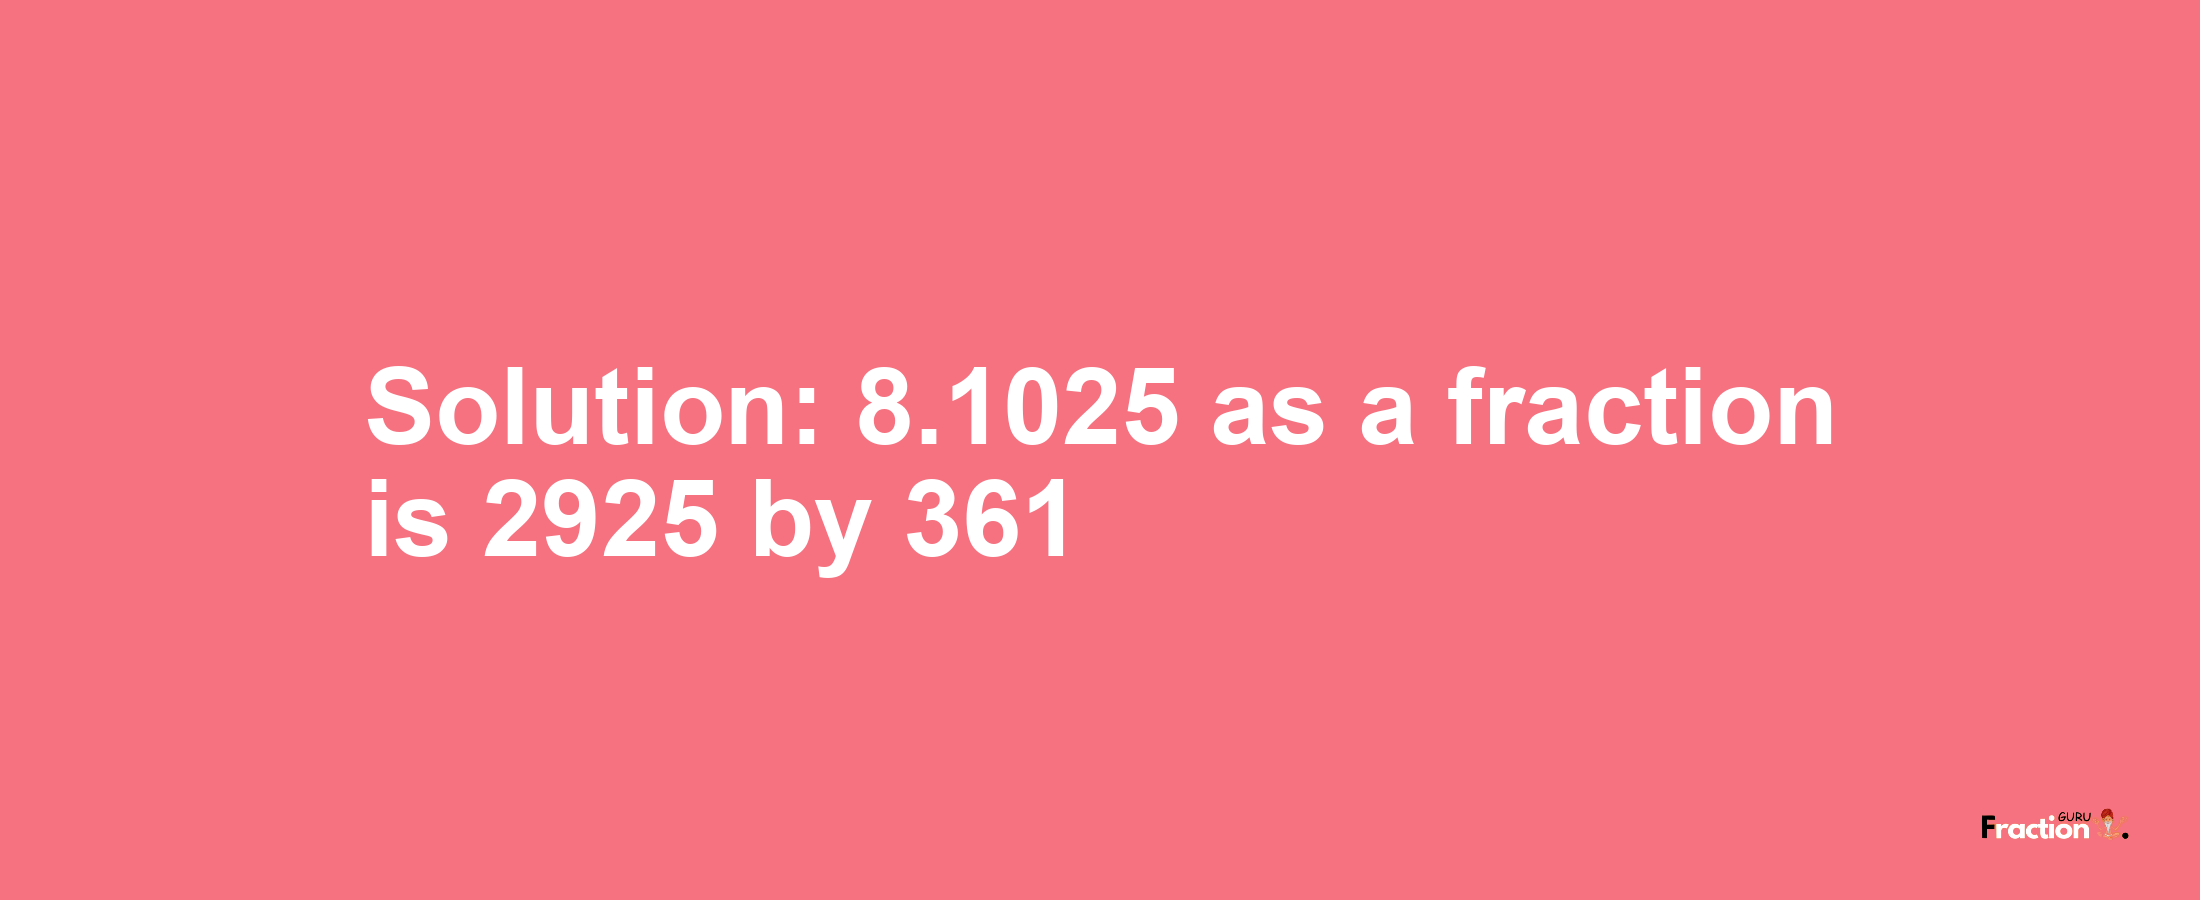 Solution:8.1025 as a fraction is 2925/361